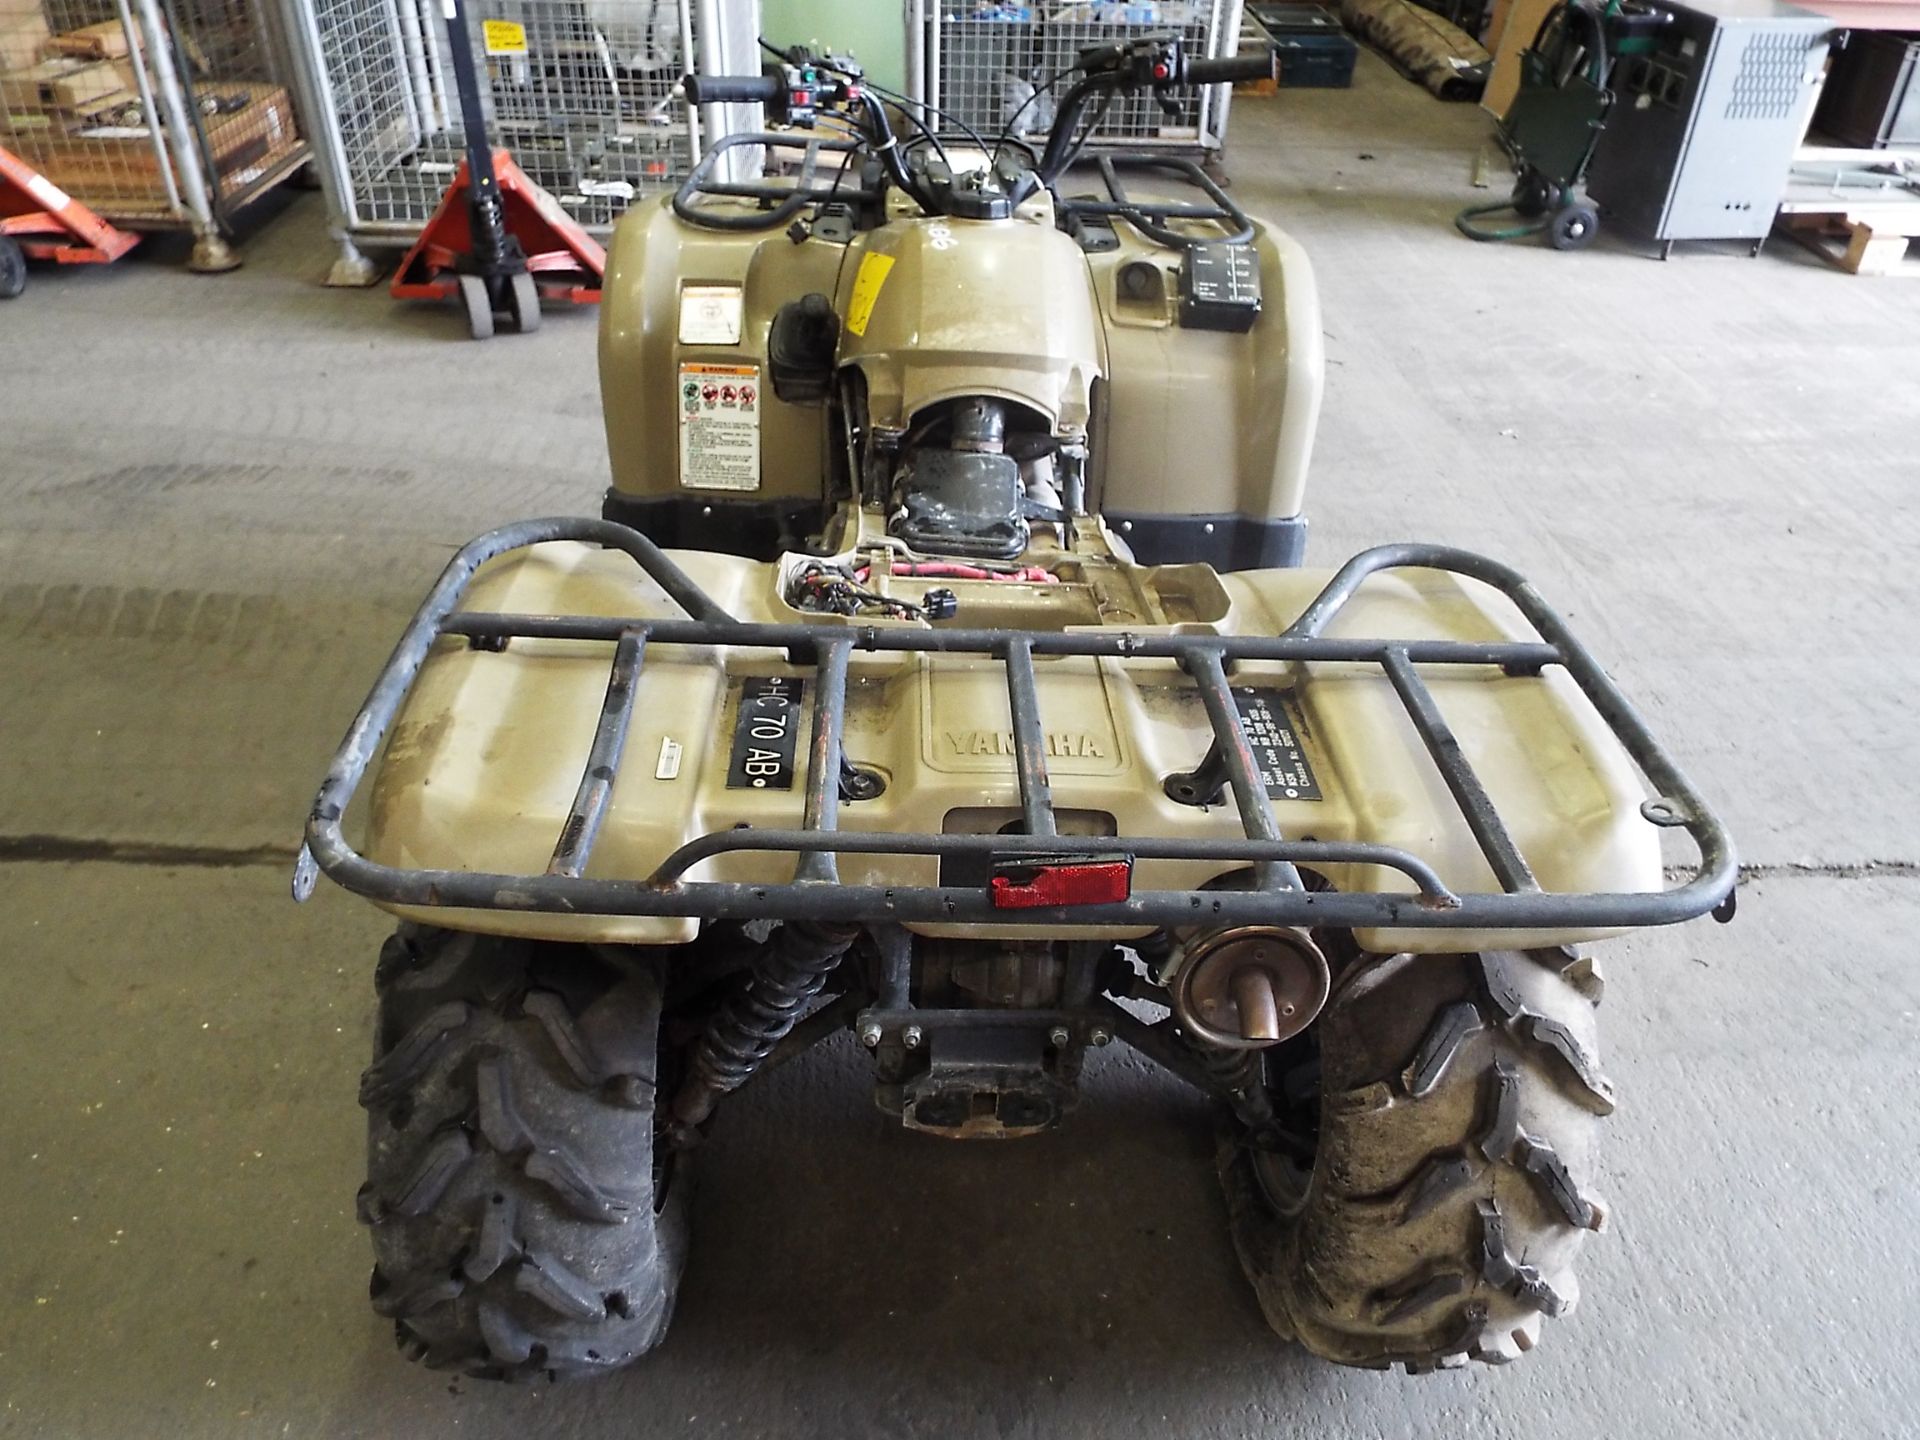 Military Specification Yamaha Grizzly 450 4 x 4 ATV Quad Bike Complete with Winch - Image 6 of 18